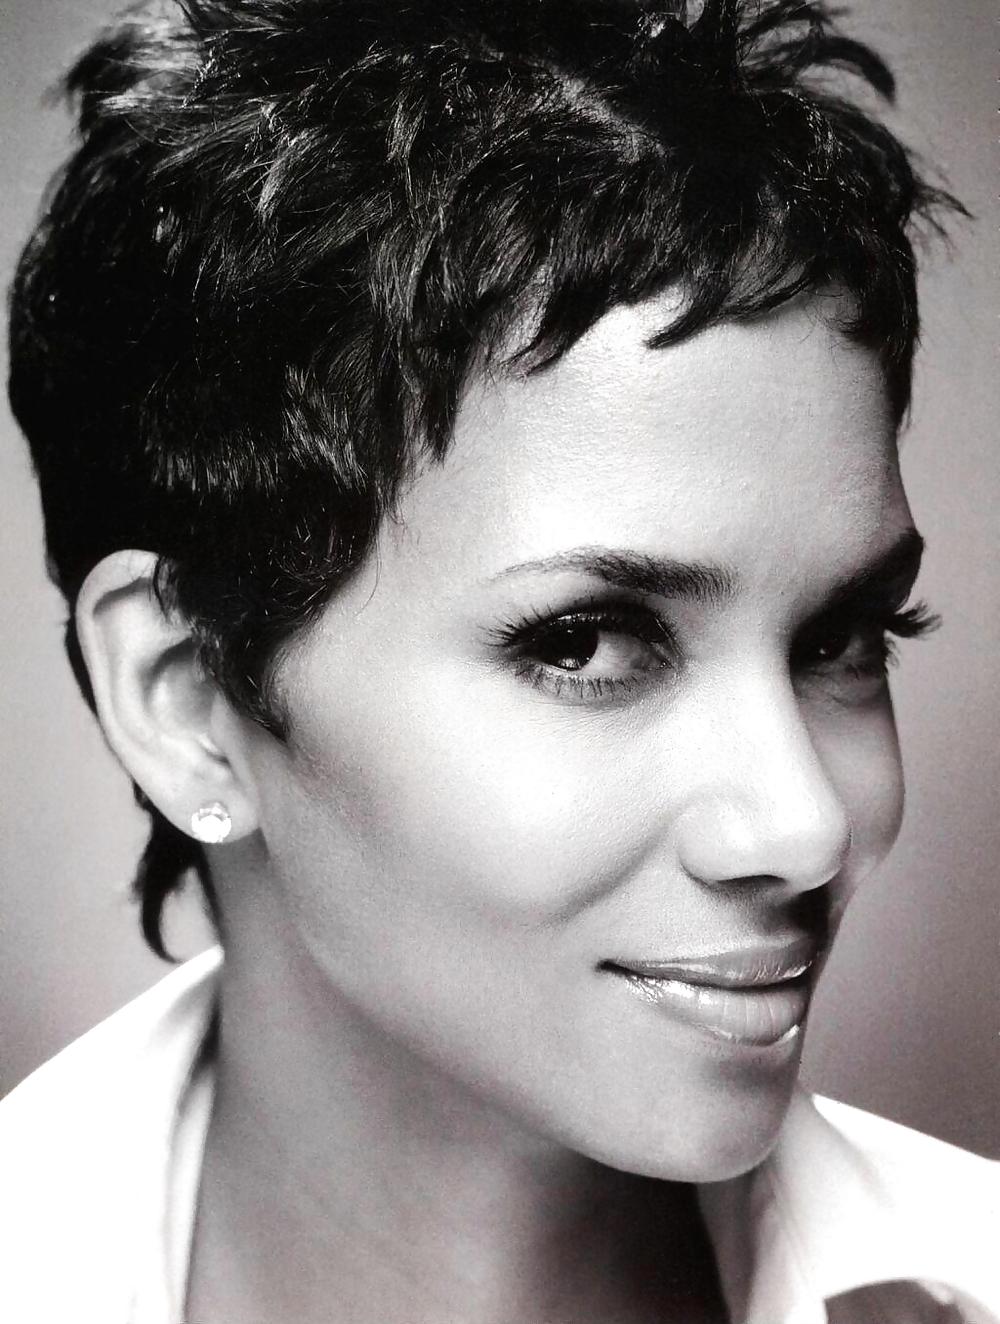 Halle berry ultimate glamour, scollatura, tappi
 #8353366